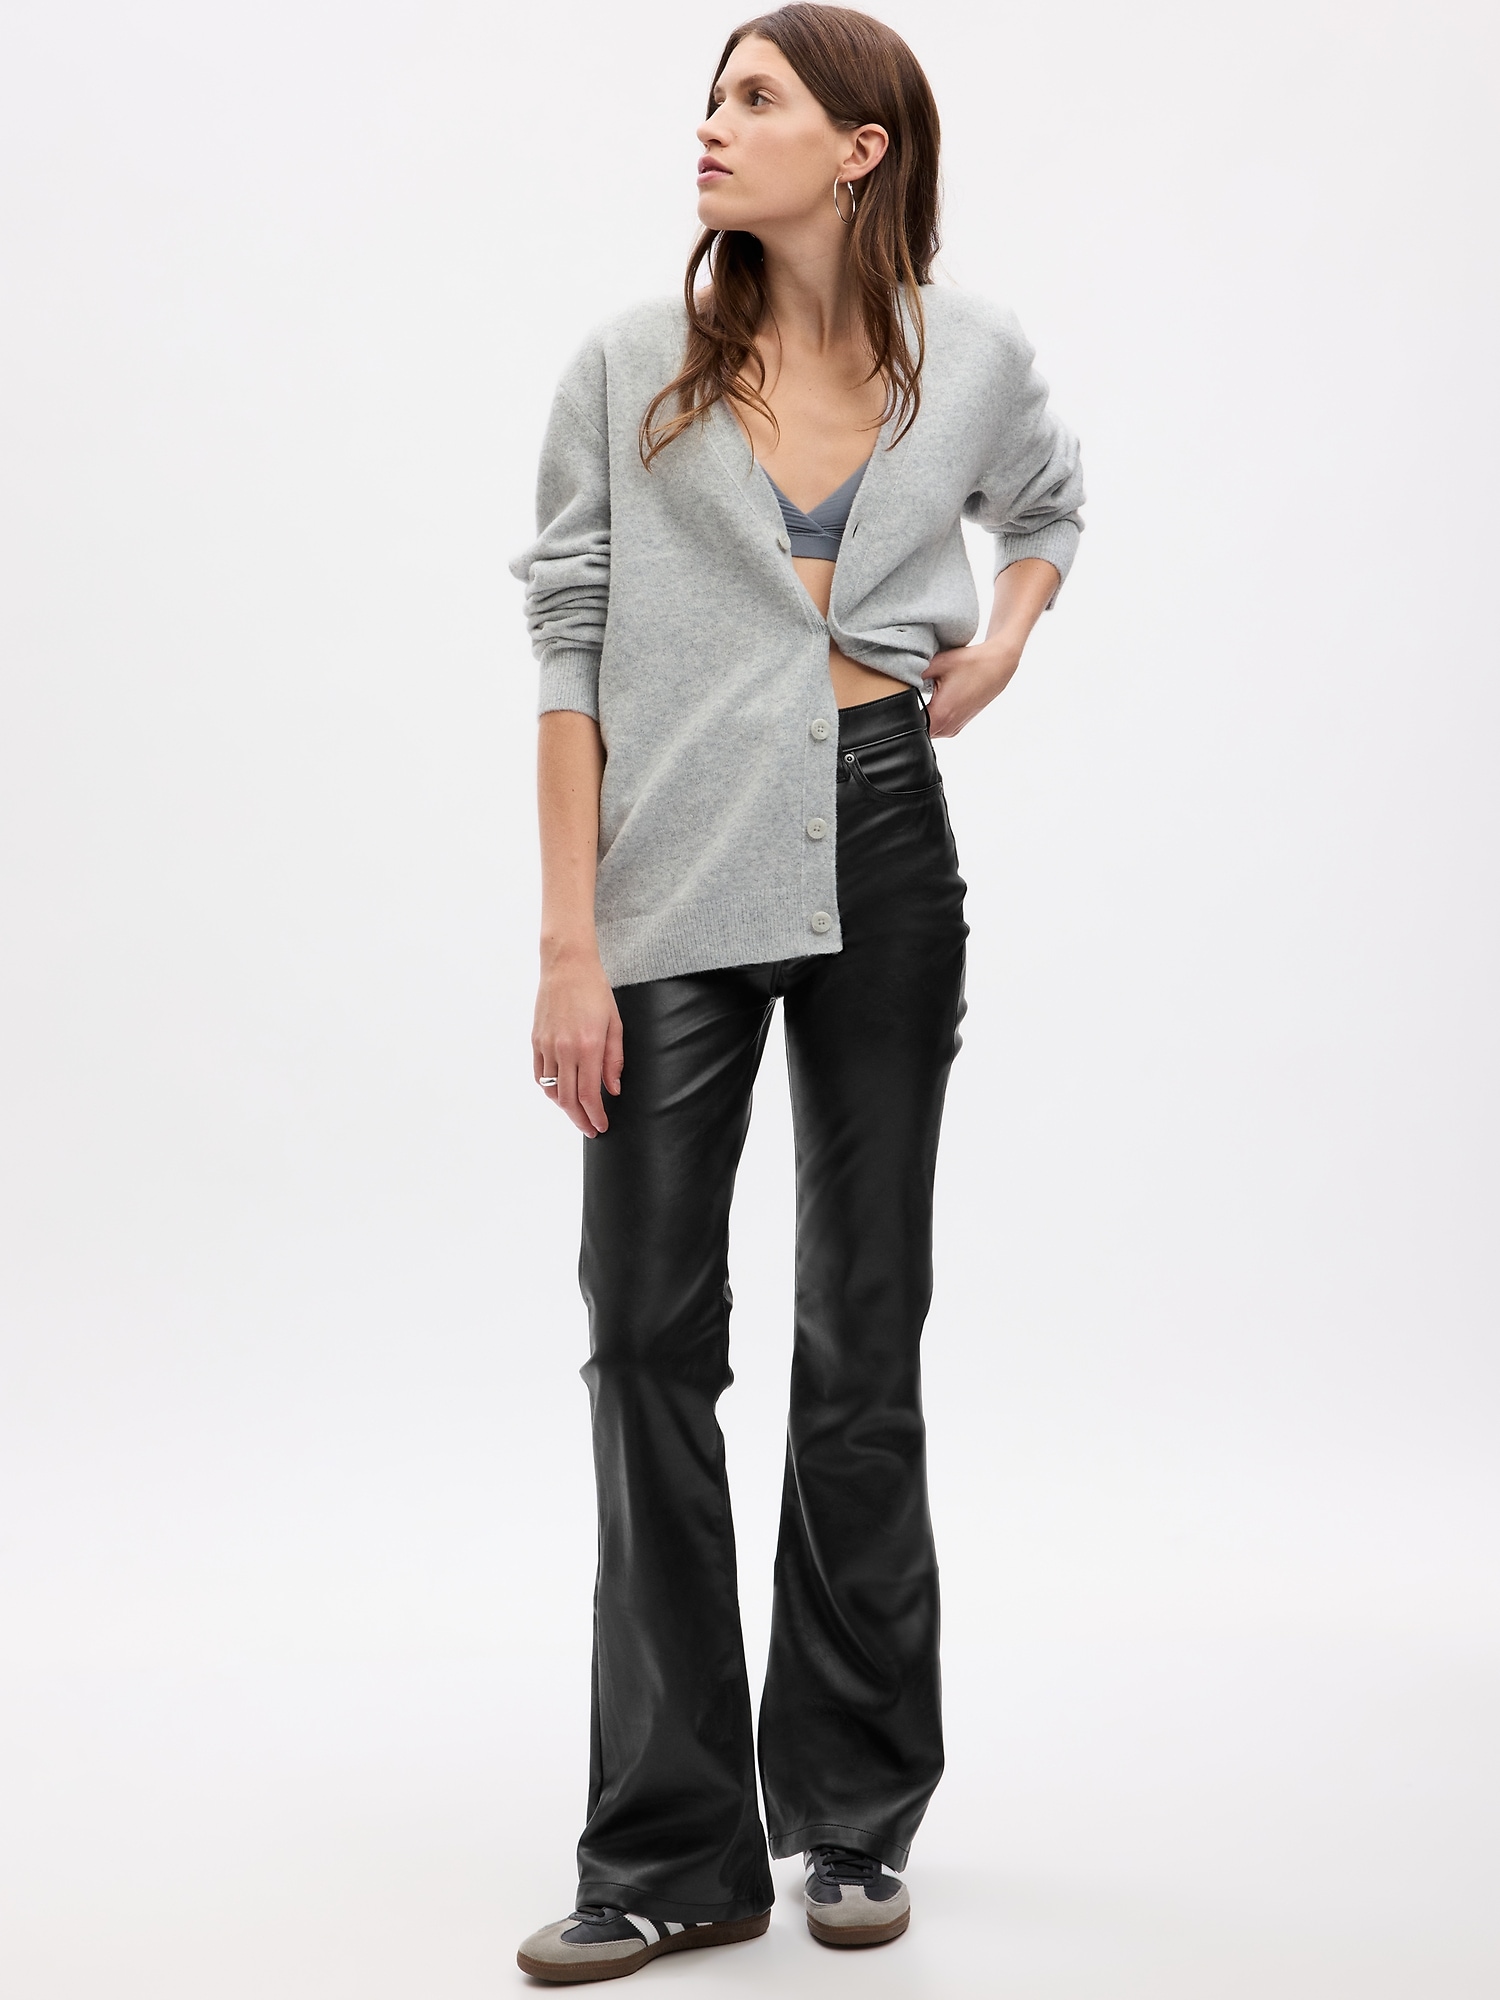 Matte Faux Leather High Waisted Flared Pants